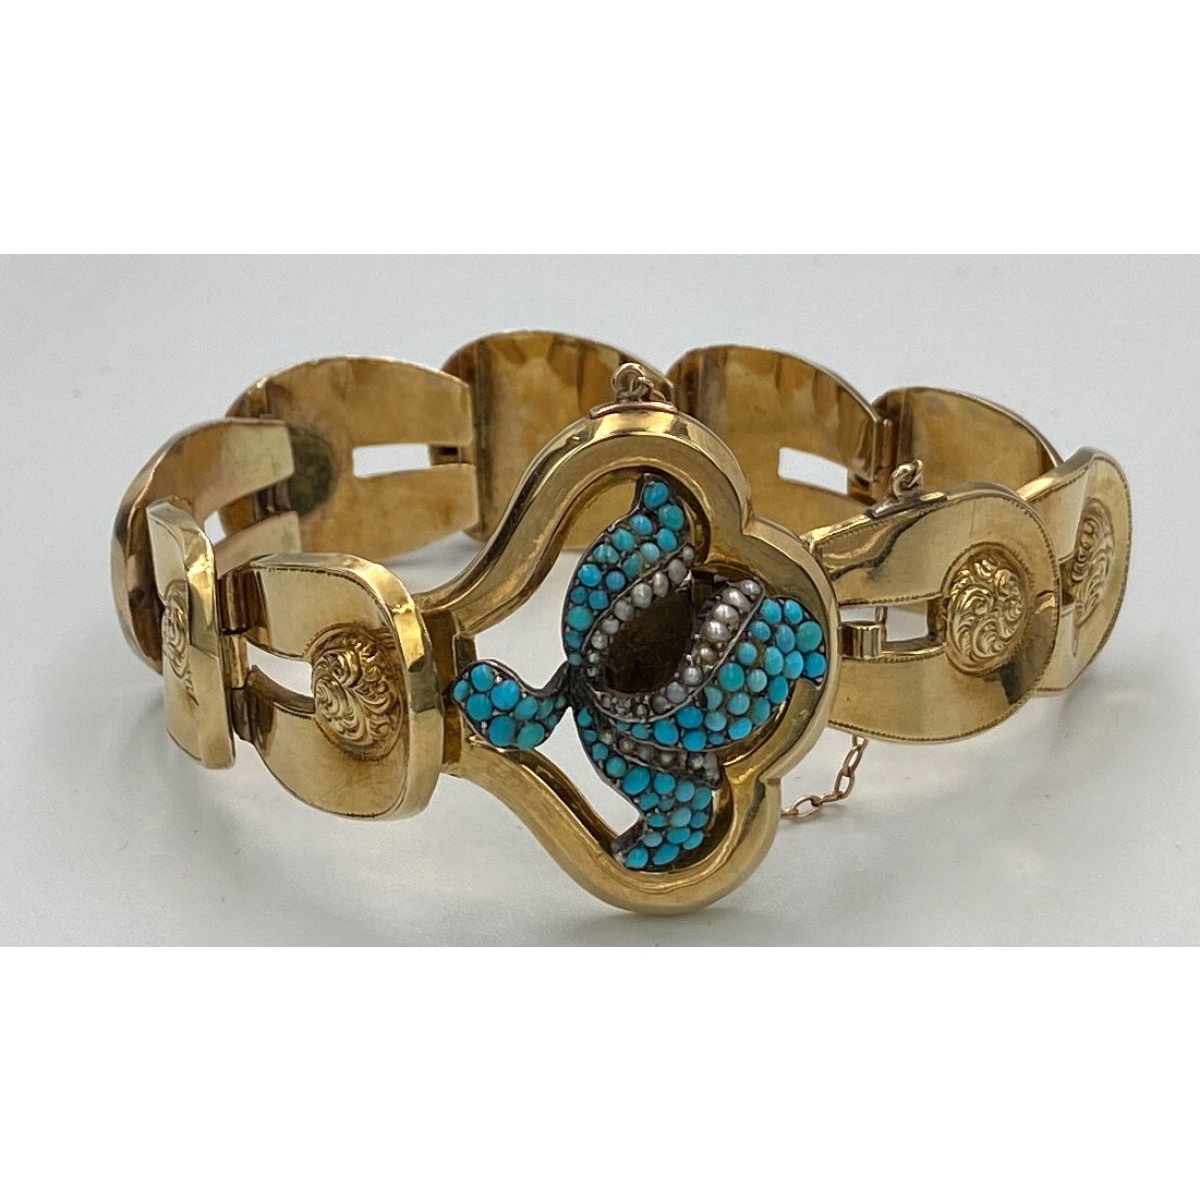 Statement 15kt Gold Bold Link Antique English Bracelet w. Turquoise and Seed Pearls